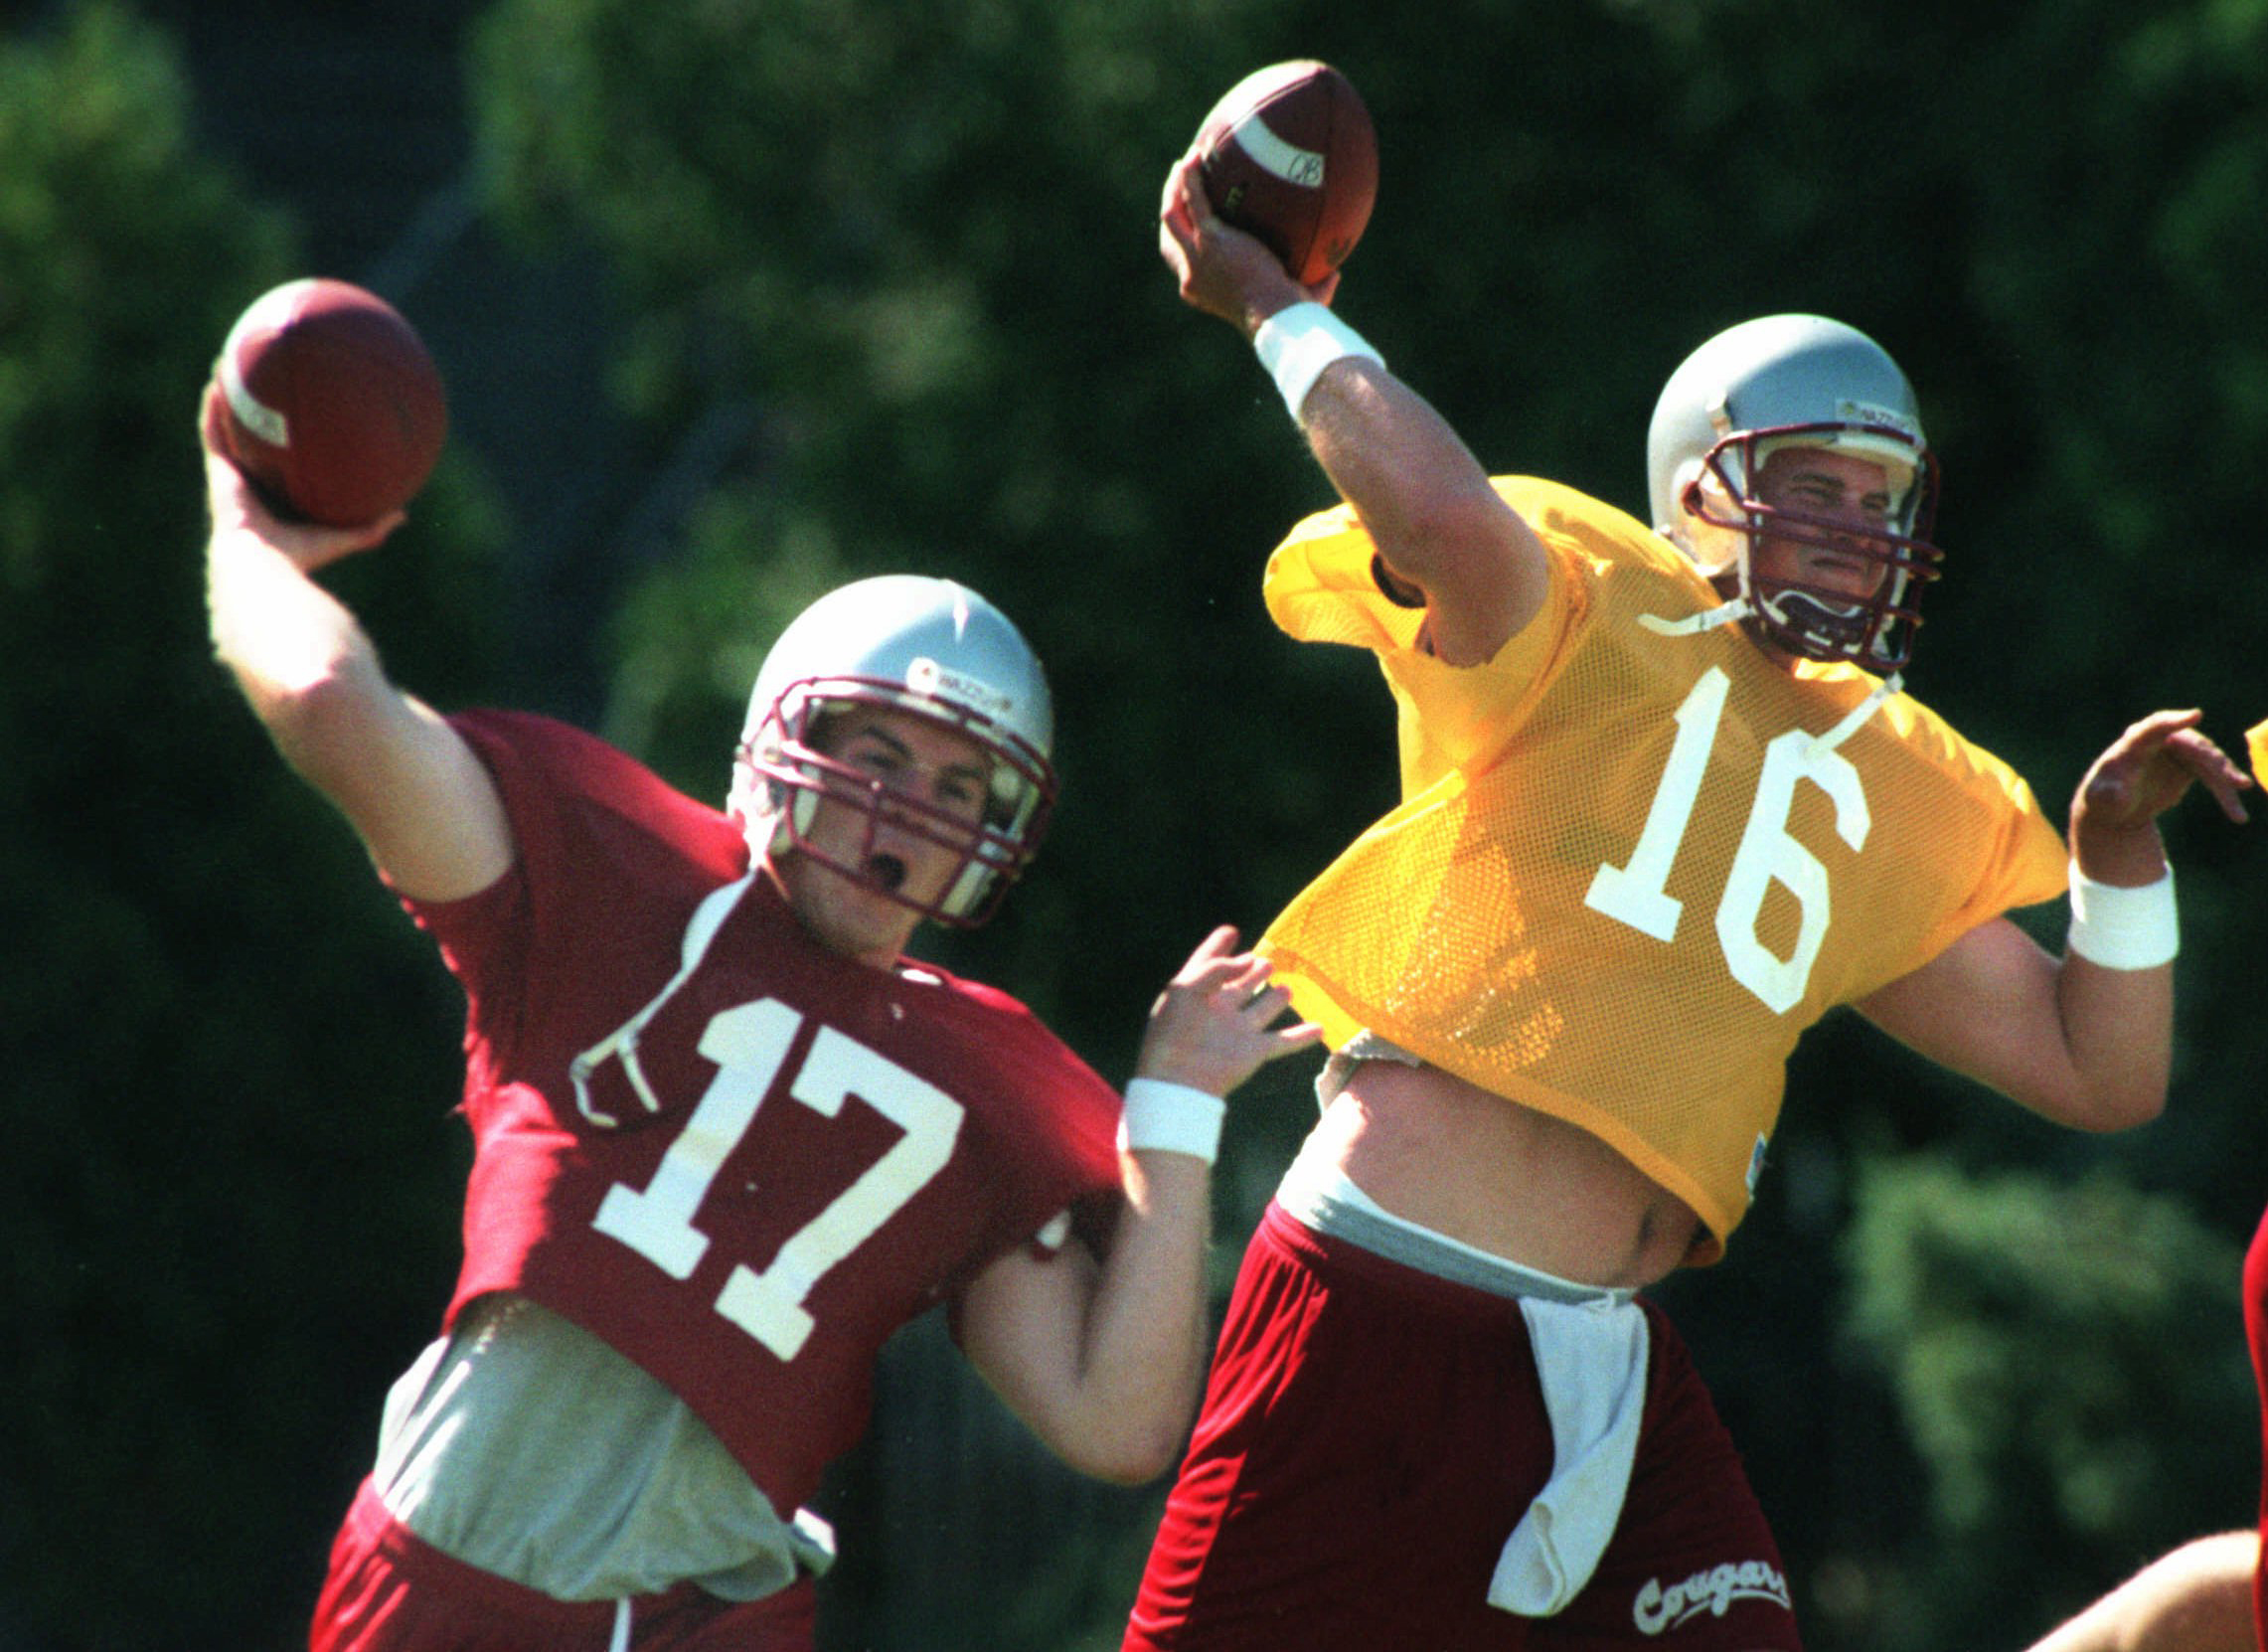 Ryan Leaf among six inductees to the WSU Athletic Hall of Fame